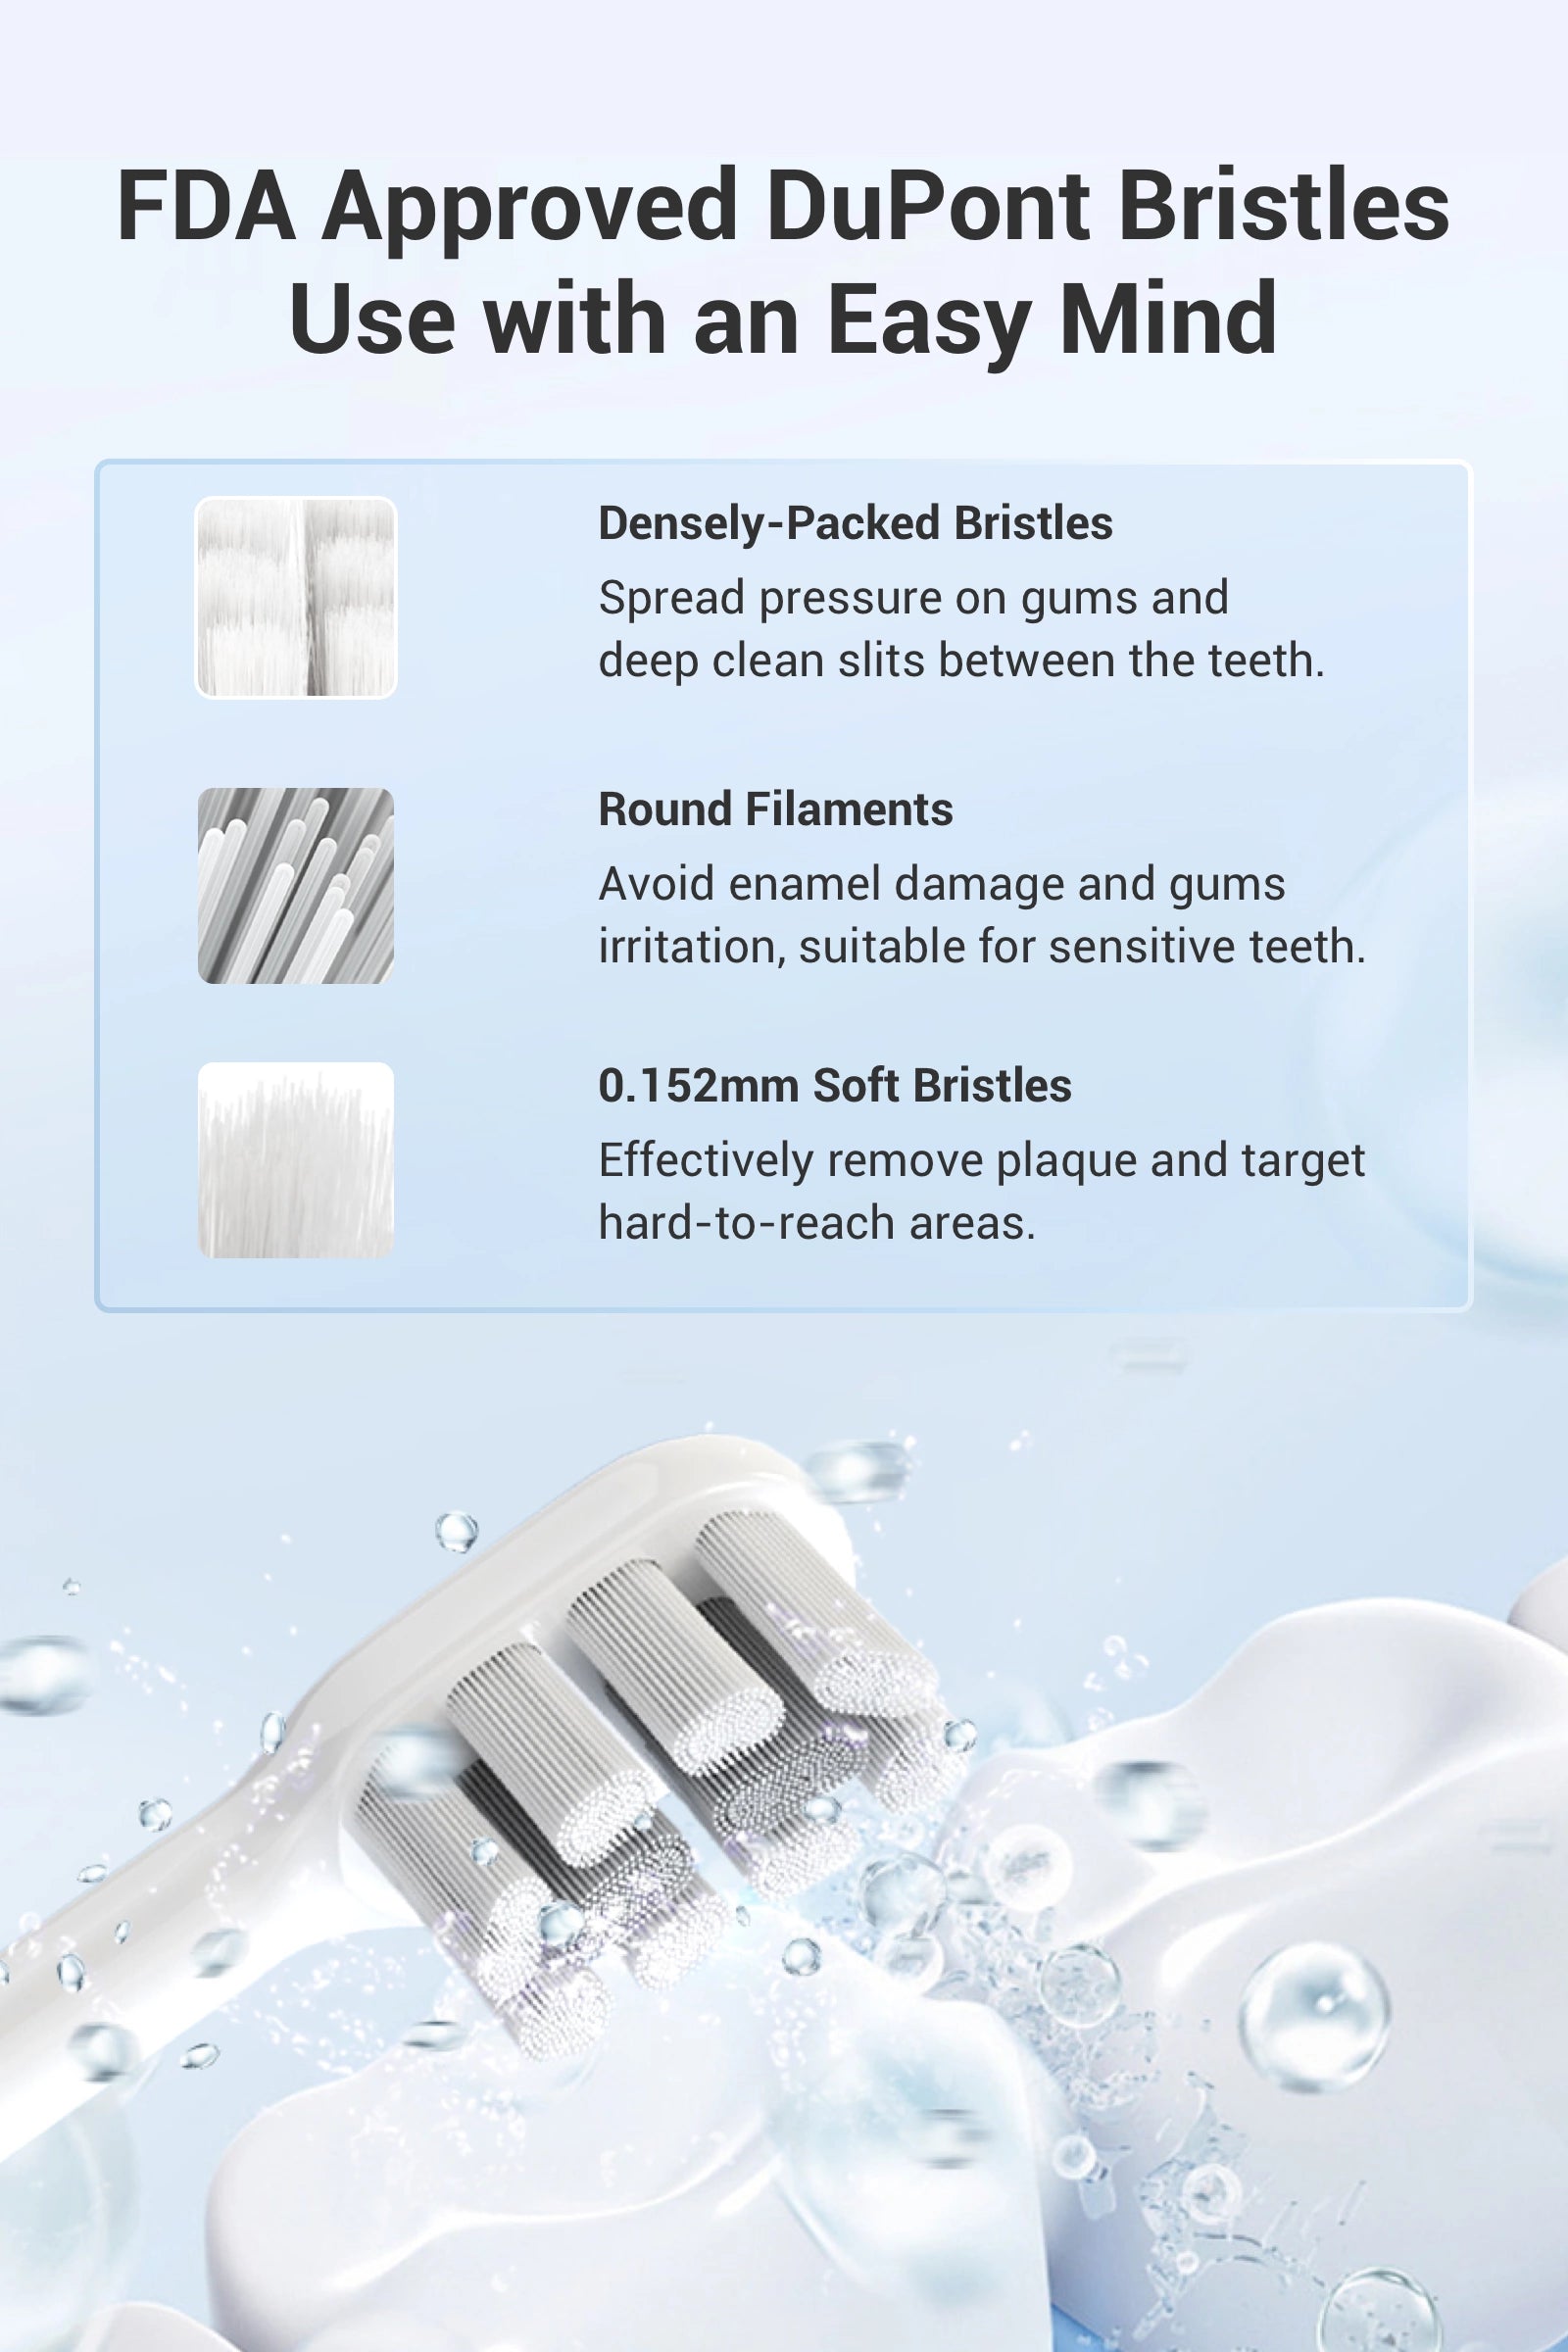 FDA Approved DuPont Bristles Use with an Easy Mind